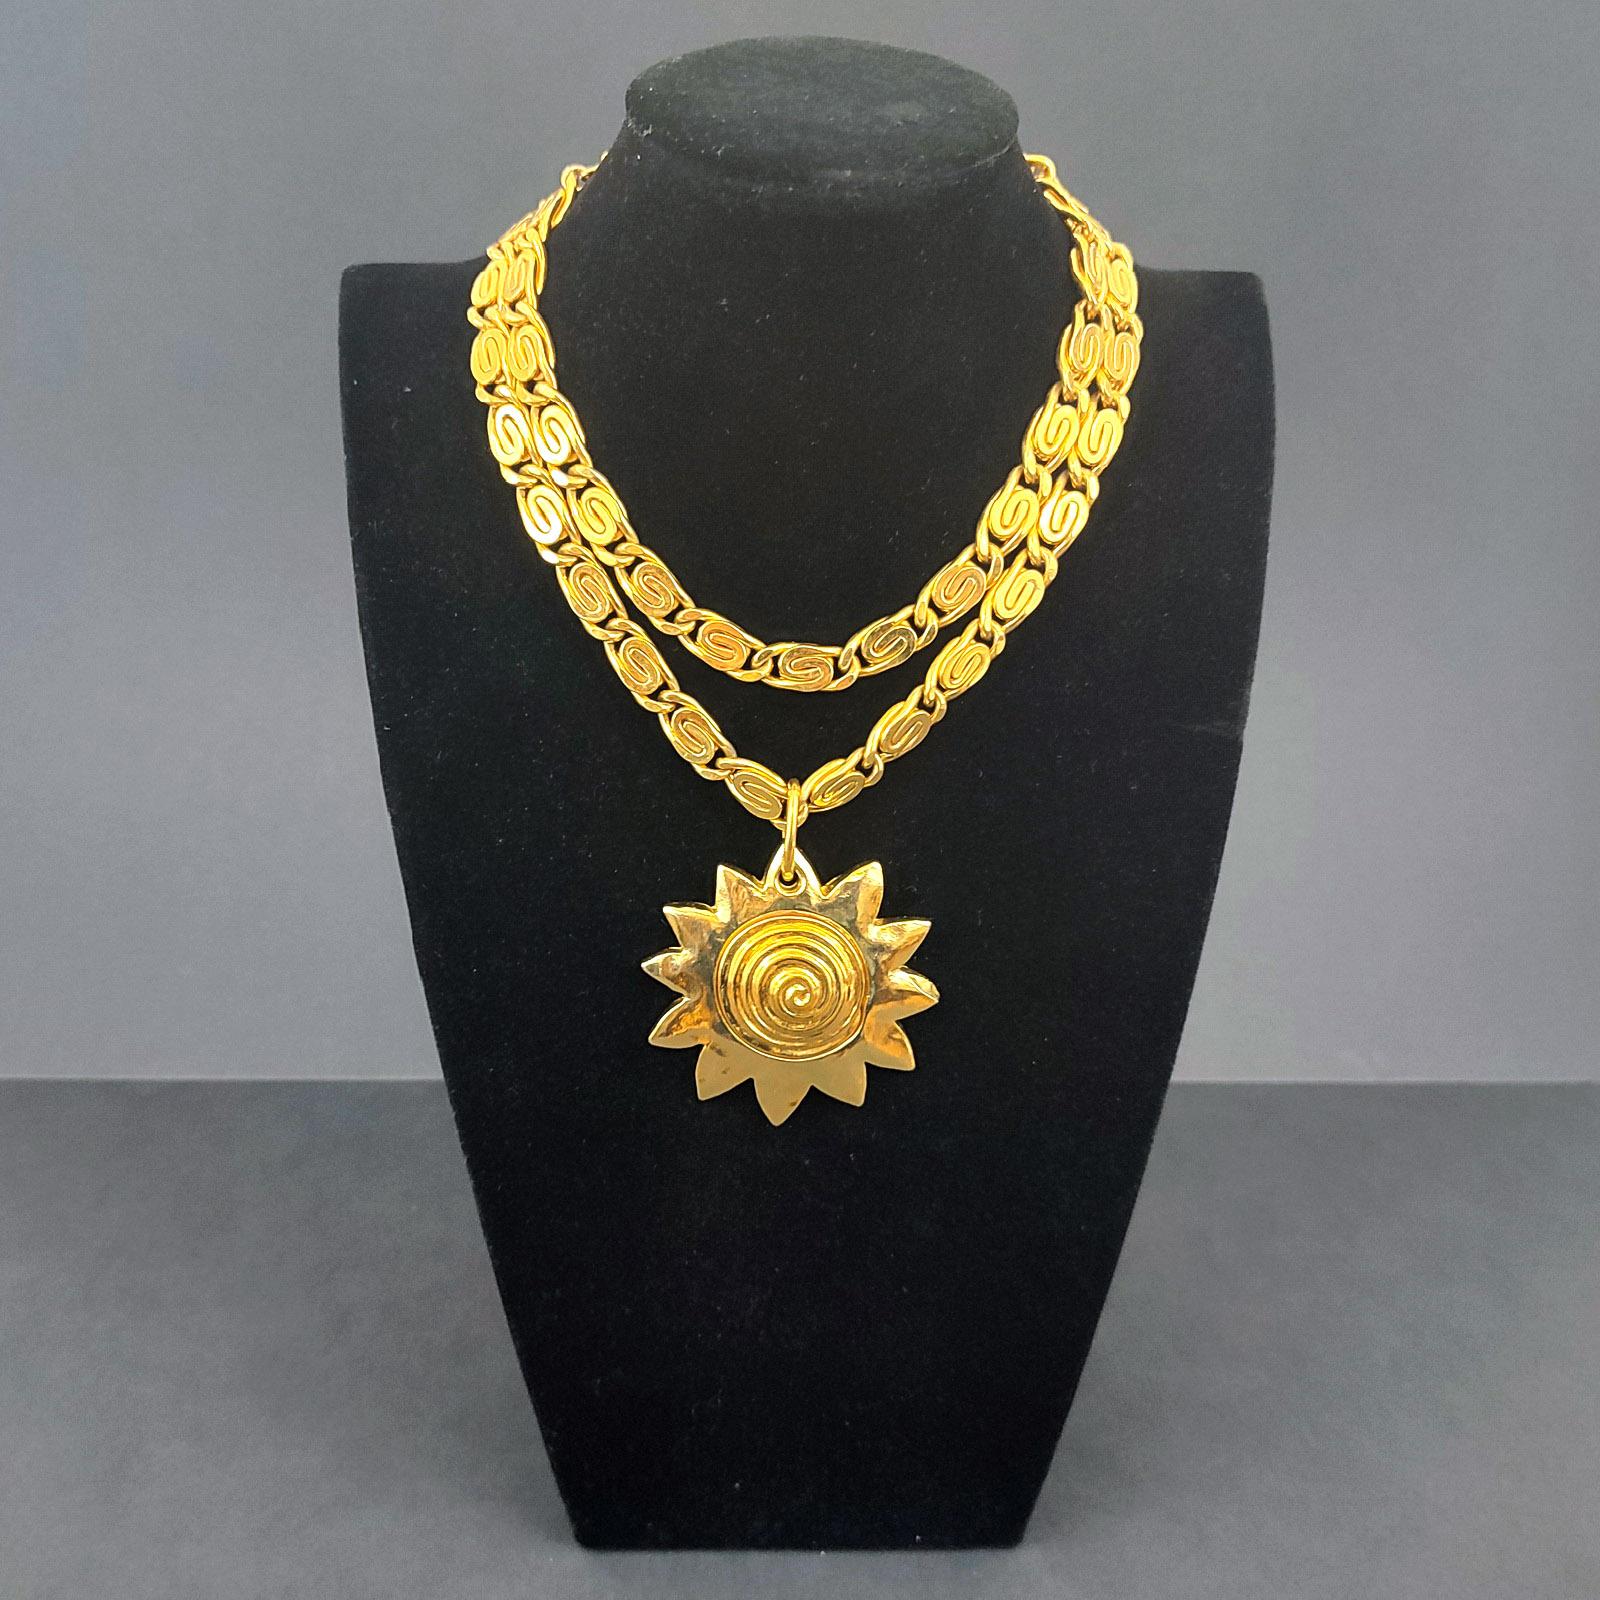 Givenchy vintage necklace with sun pendant, France 1980s.
Impressive collier made of thick double chain with an amazing sun motif pendant. In excellent preowned condition. Maker's marks, Givenchy Paris New York.

Measurements: length 38 cm,